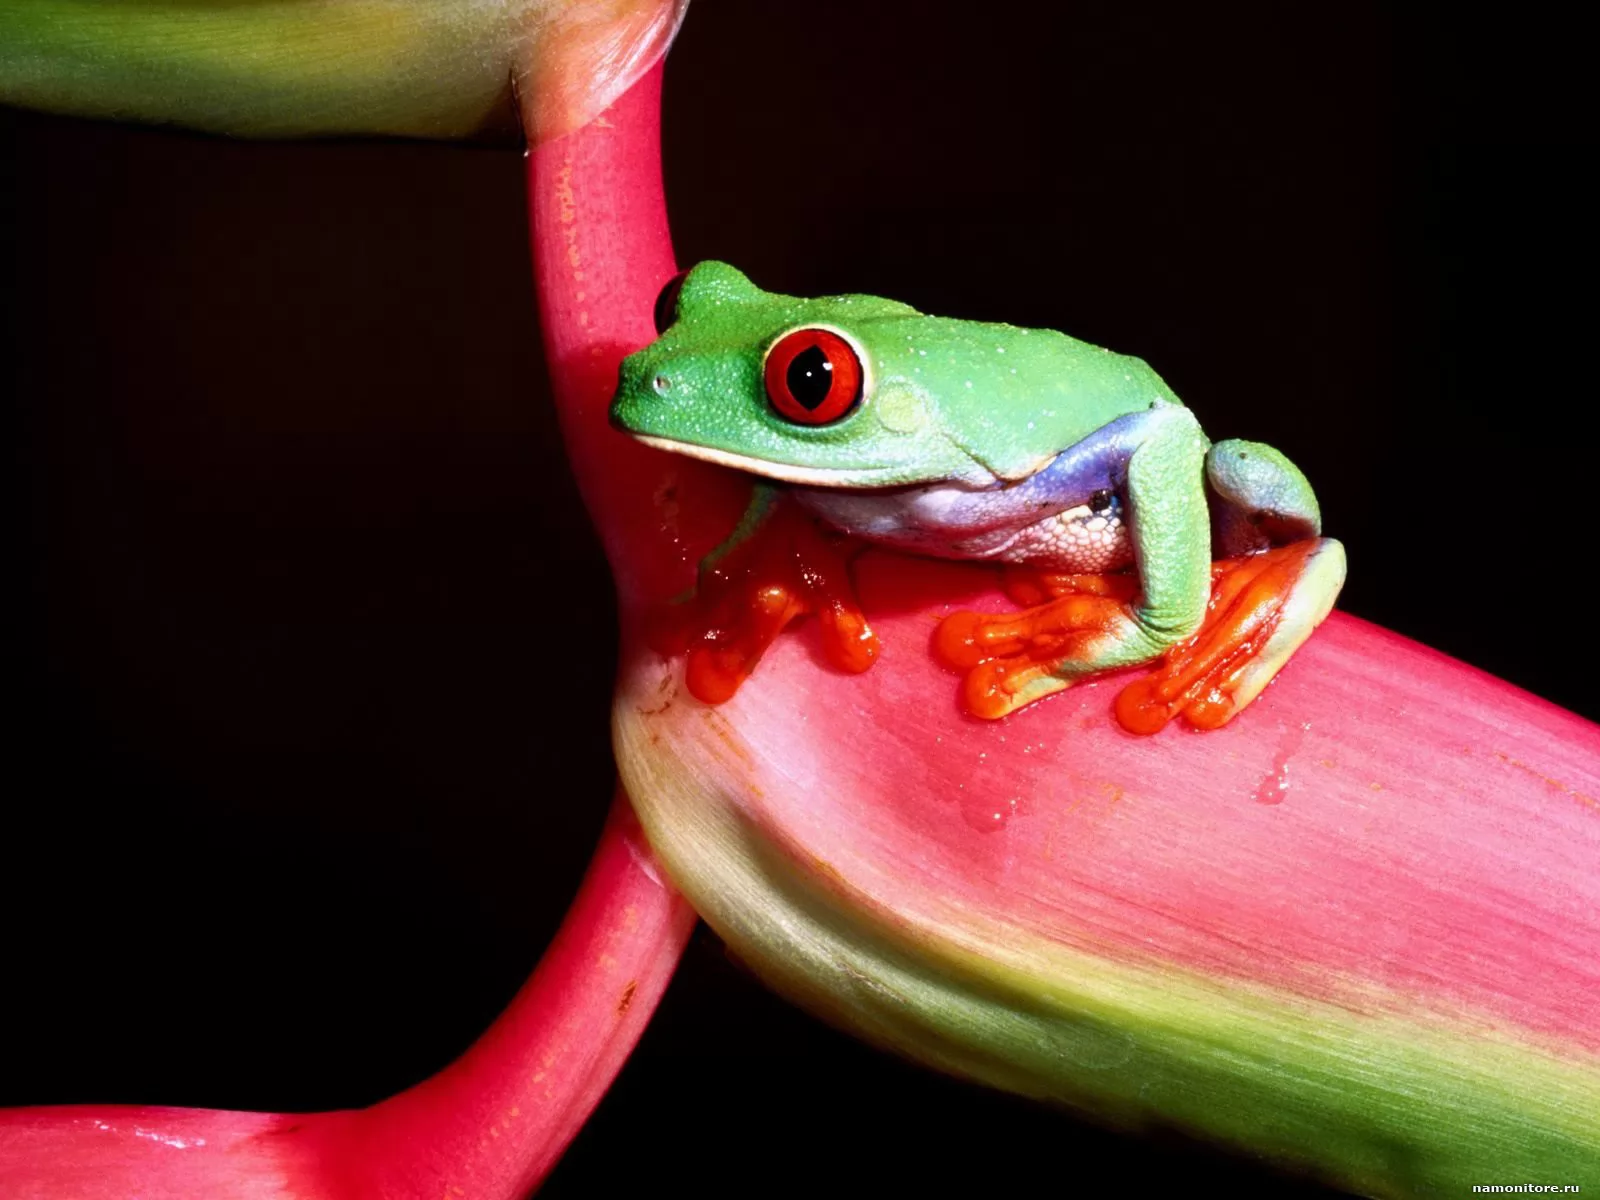 The Young frog, amphibious, animals, frogs, green, pink x